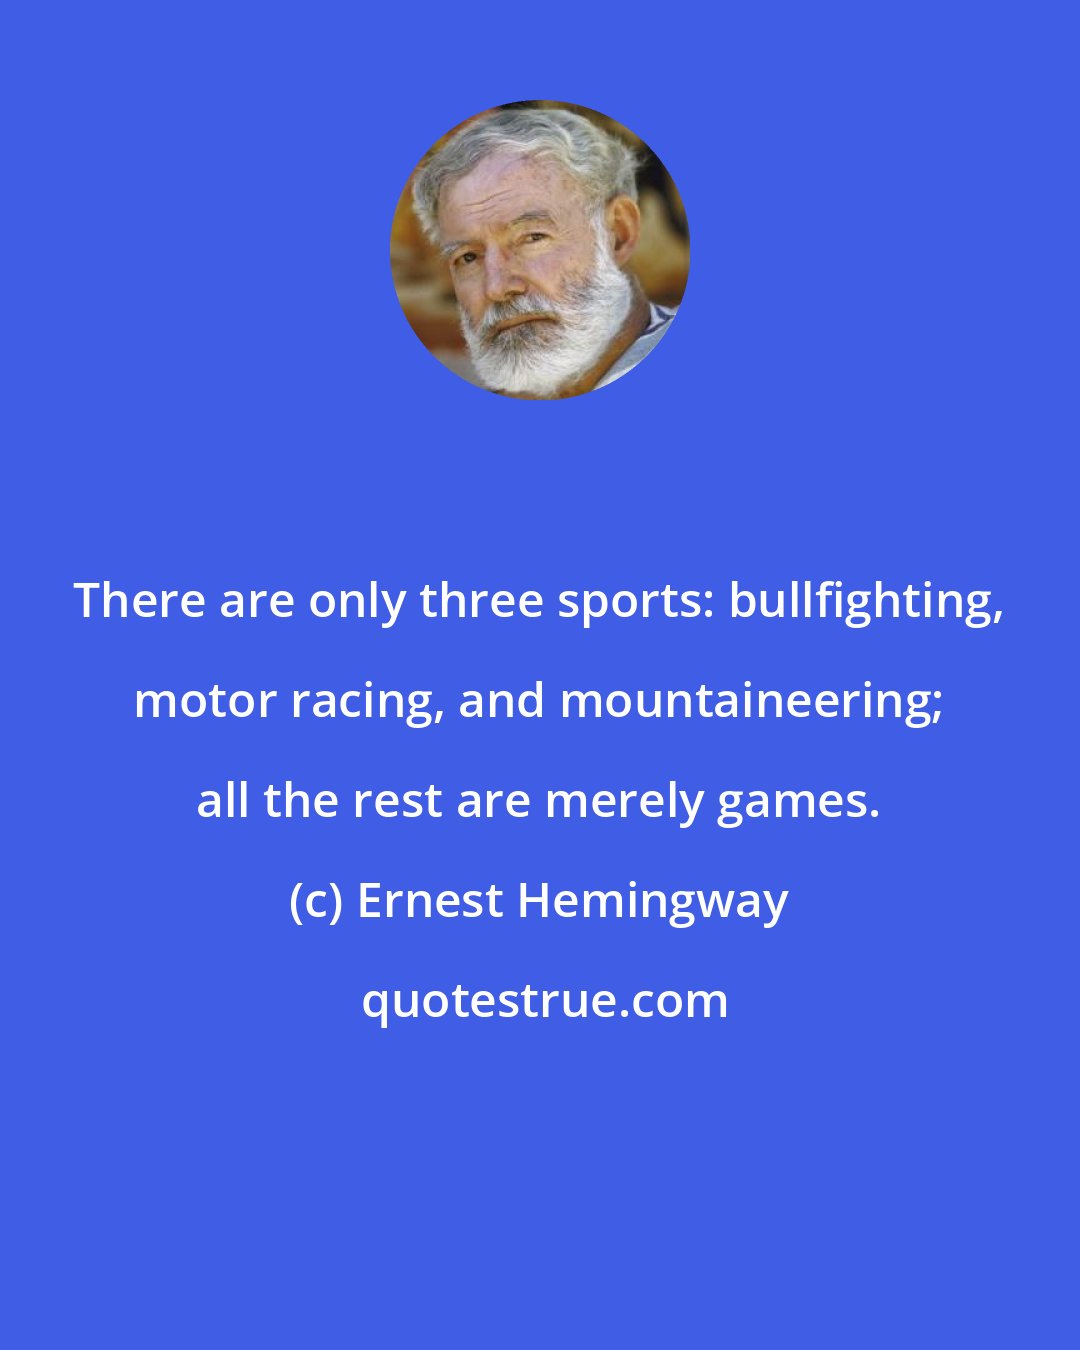 Ernest Hemingway: There are only three sports: bullfighting, motor racing, and mountaineering; all the rest are merely games.